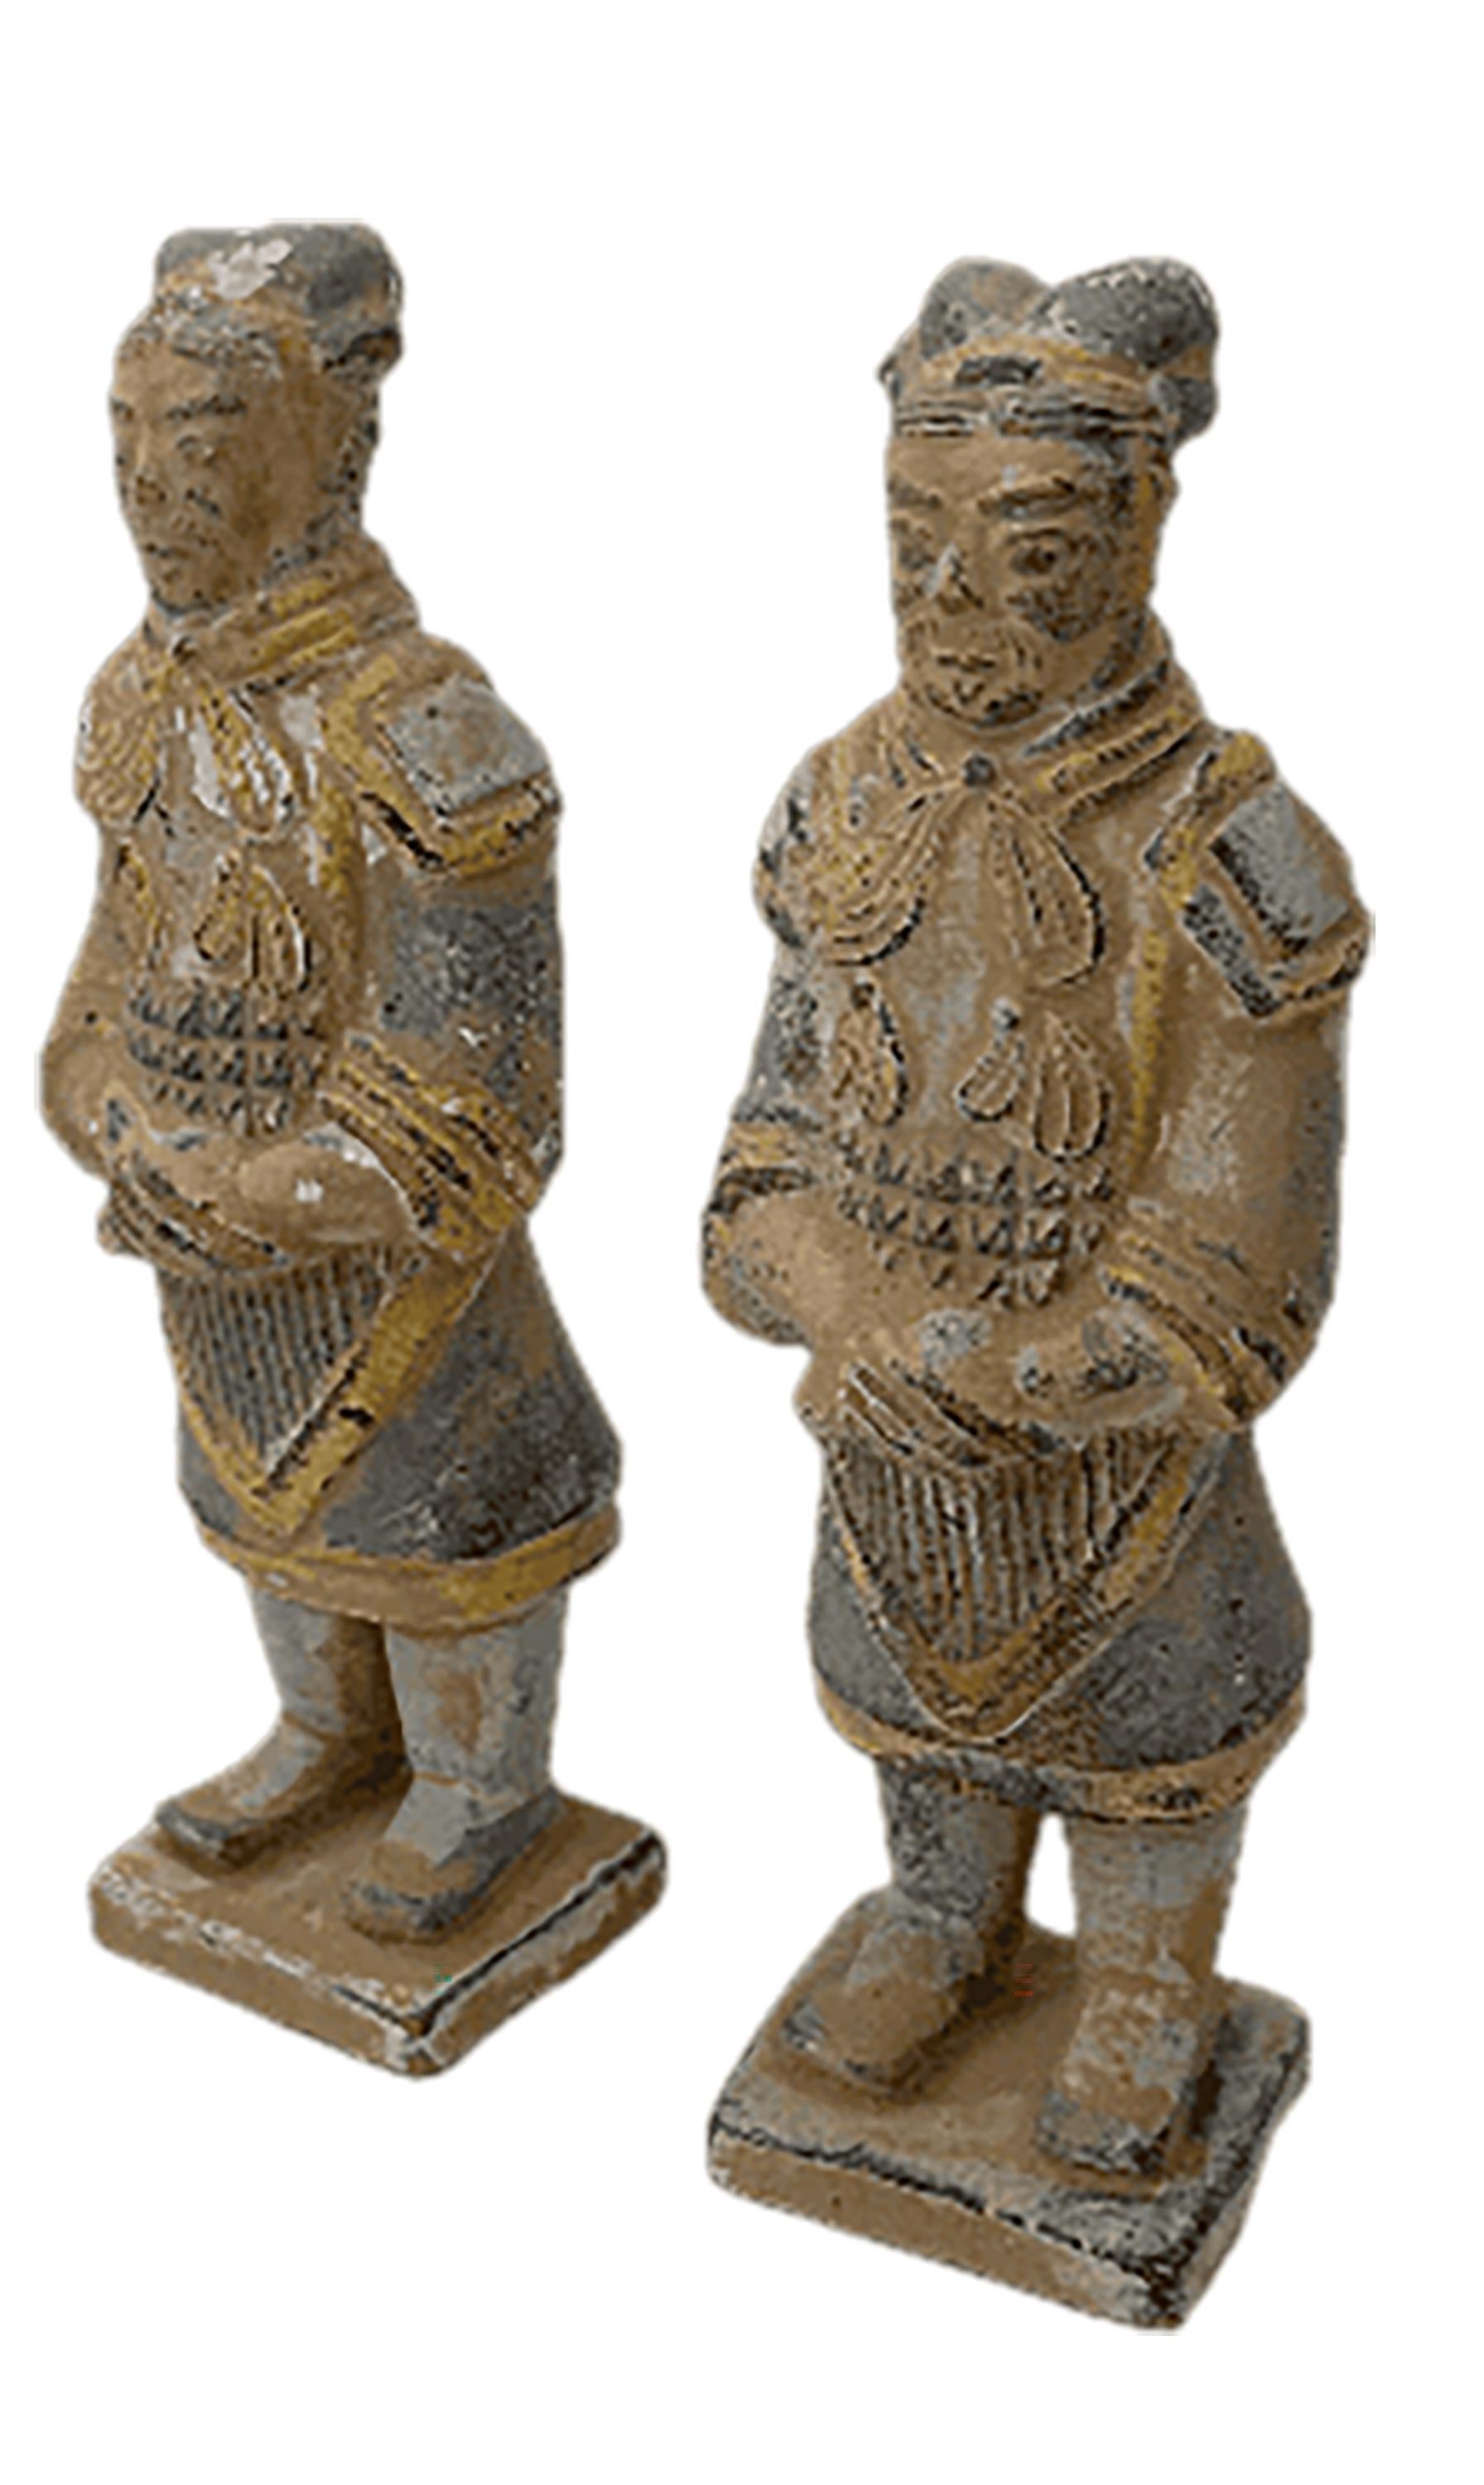 20th Century A pair of miniature Chinese terracotta burial soldier figurines